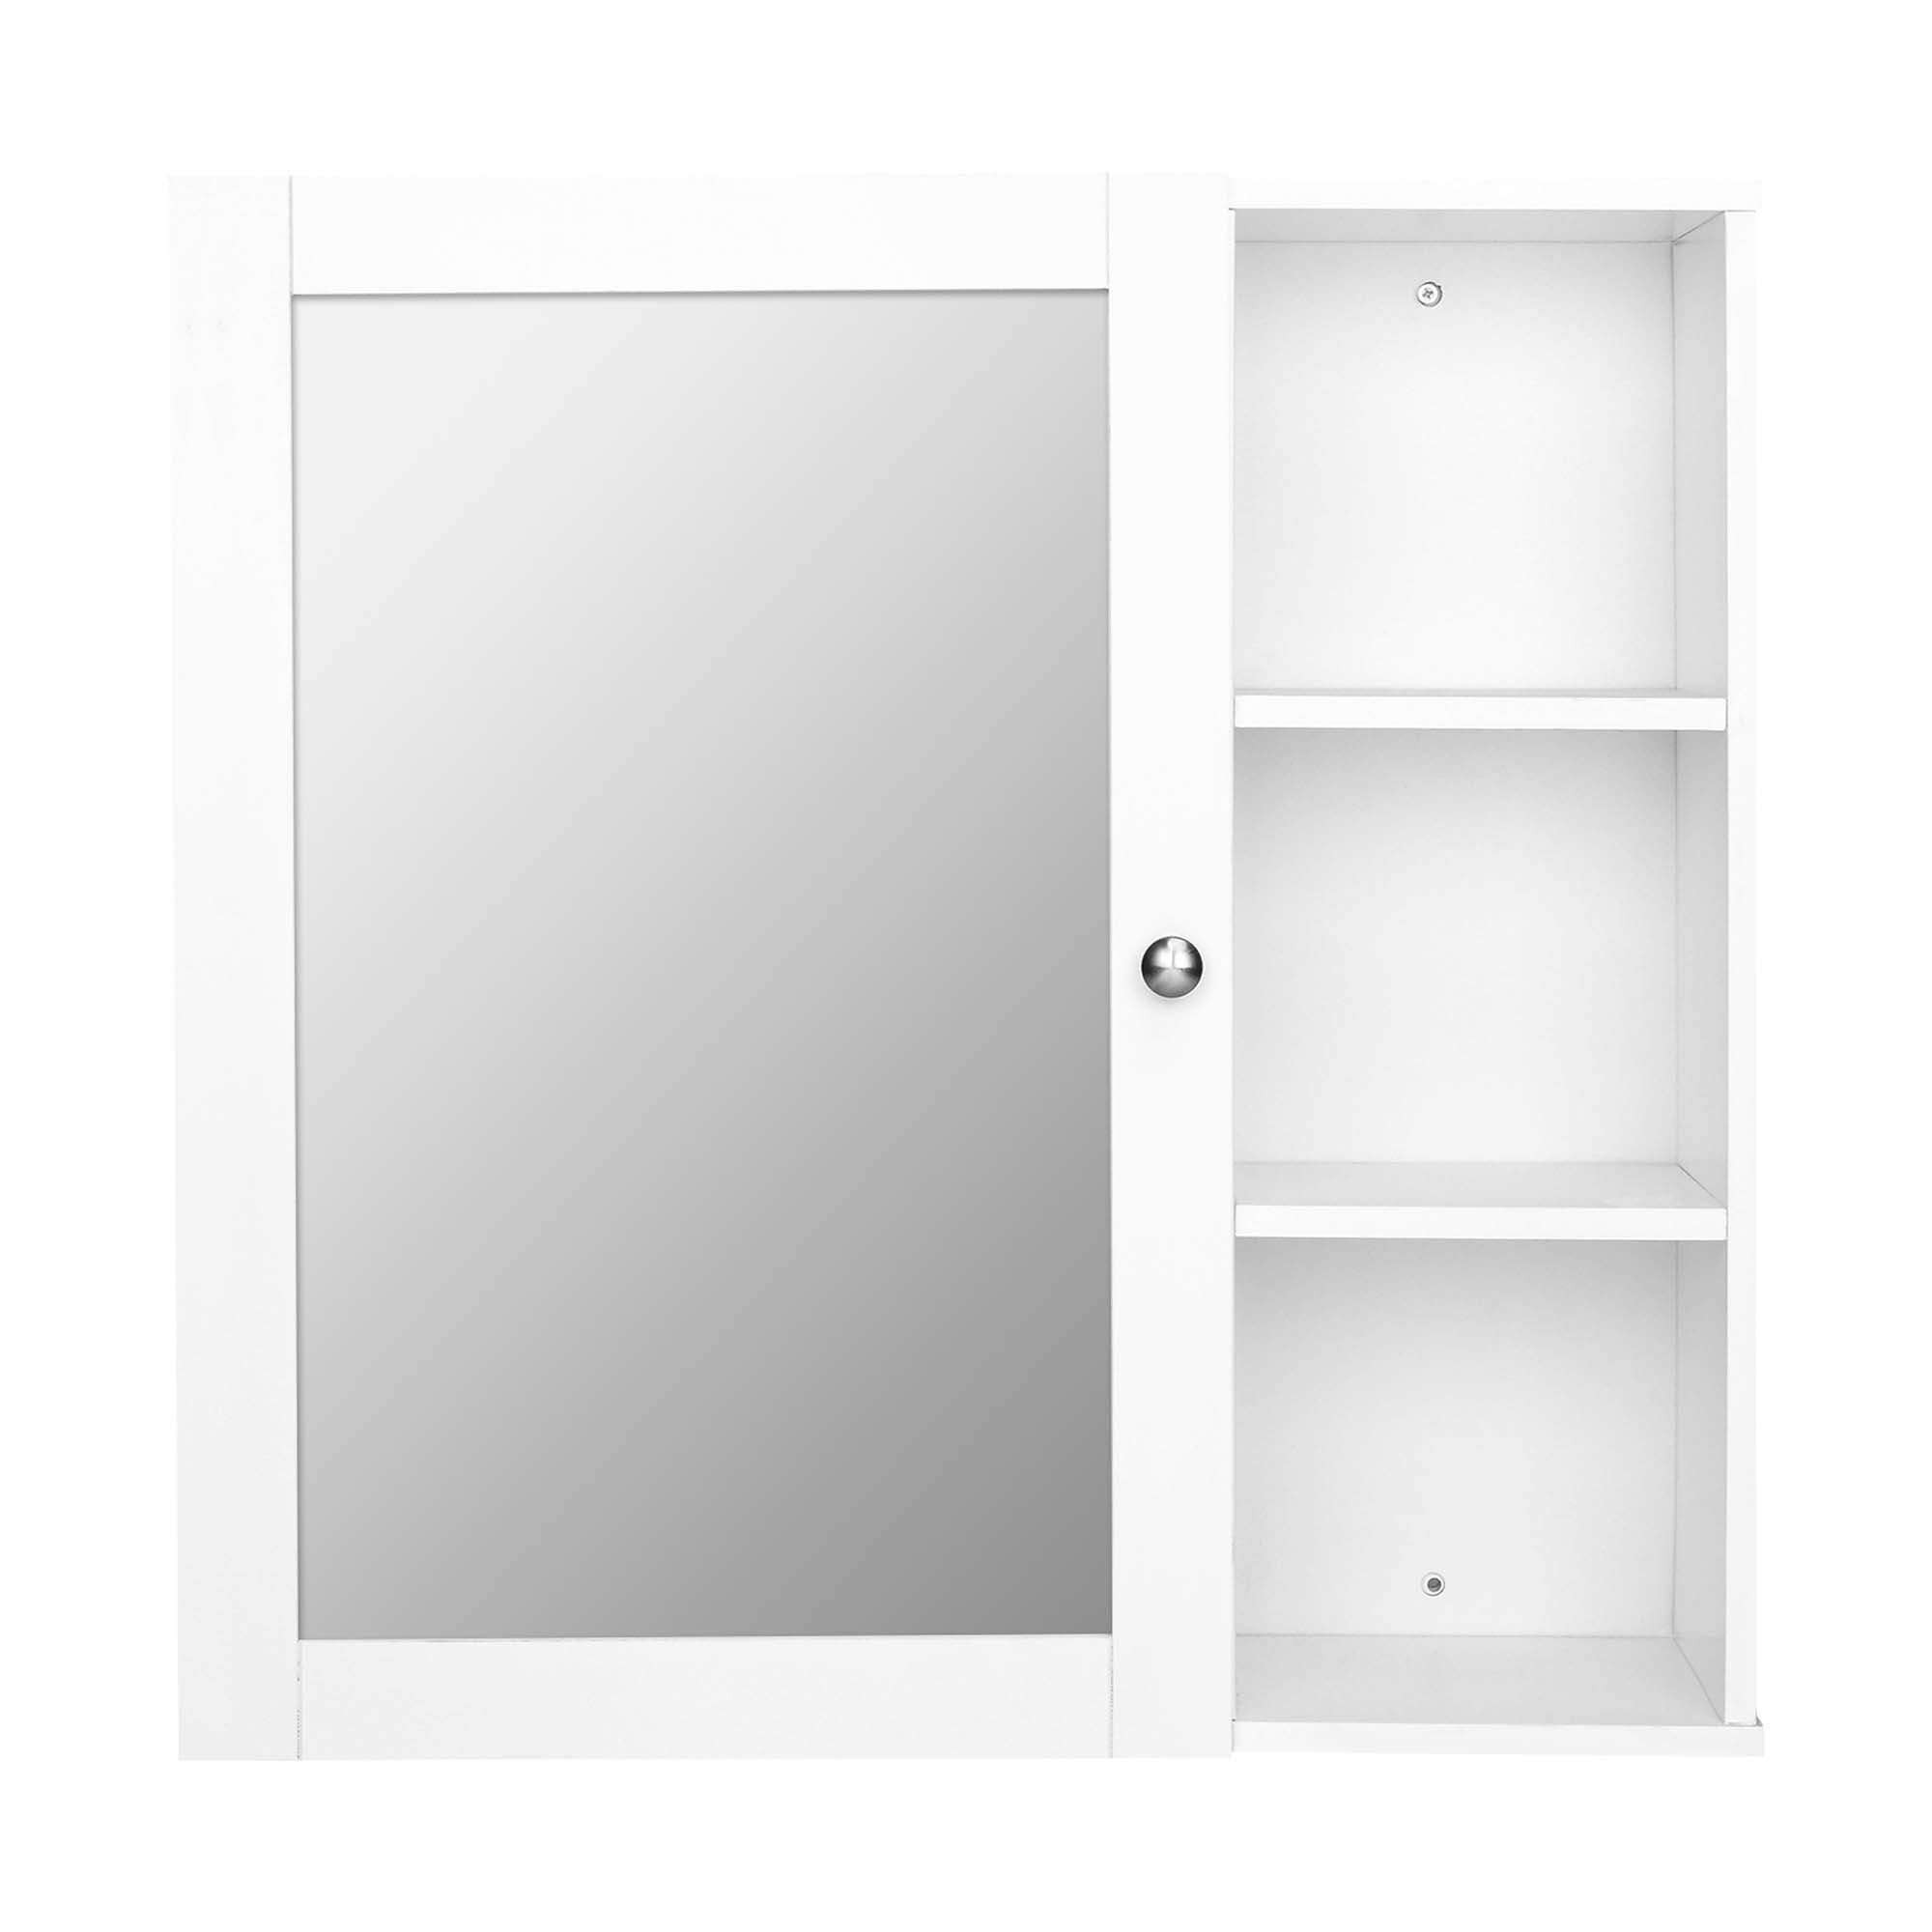 Buy Wholesale QI003745 White Wall Mounted Bathroom Storage Cabinet Organizer,  Mirrored Vanity Medicine Chest with Open Shelves